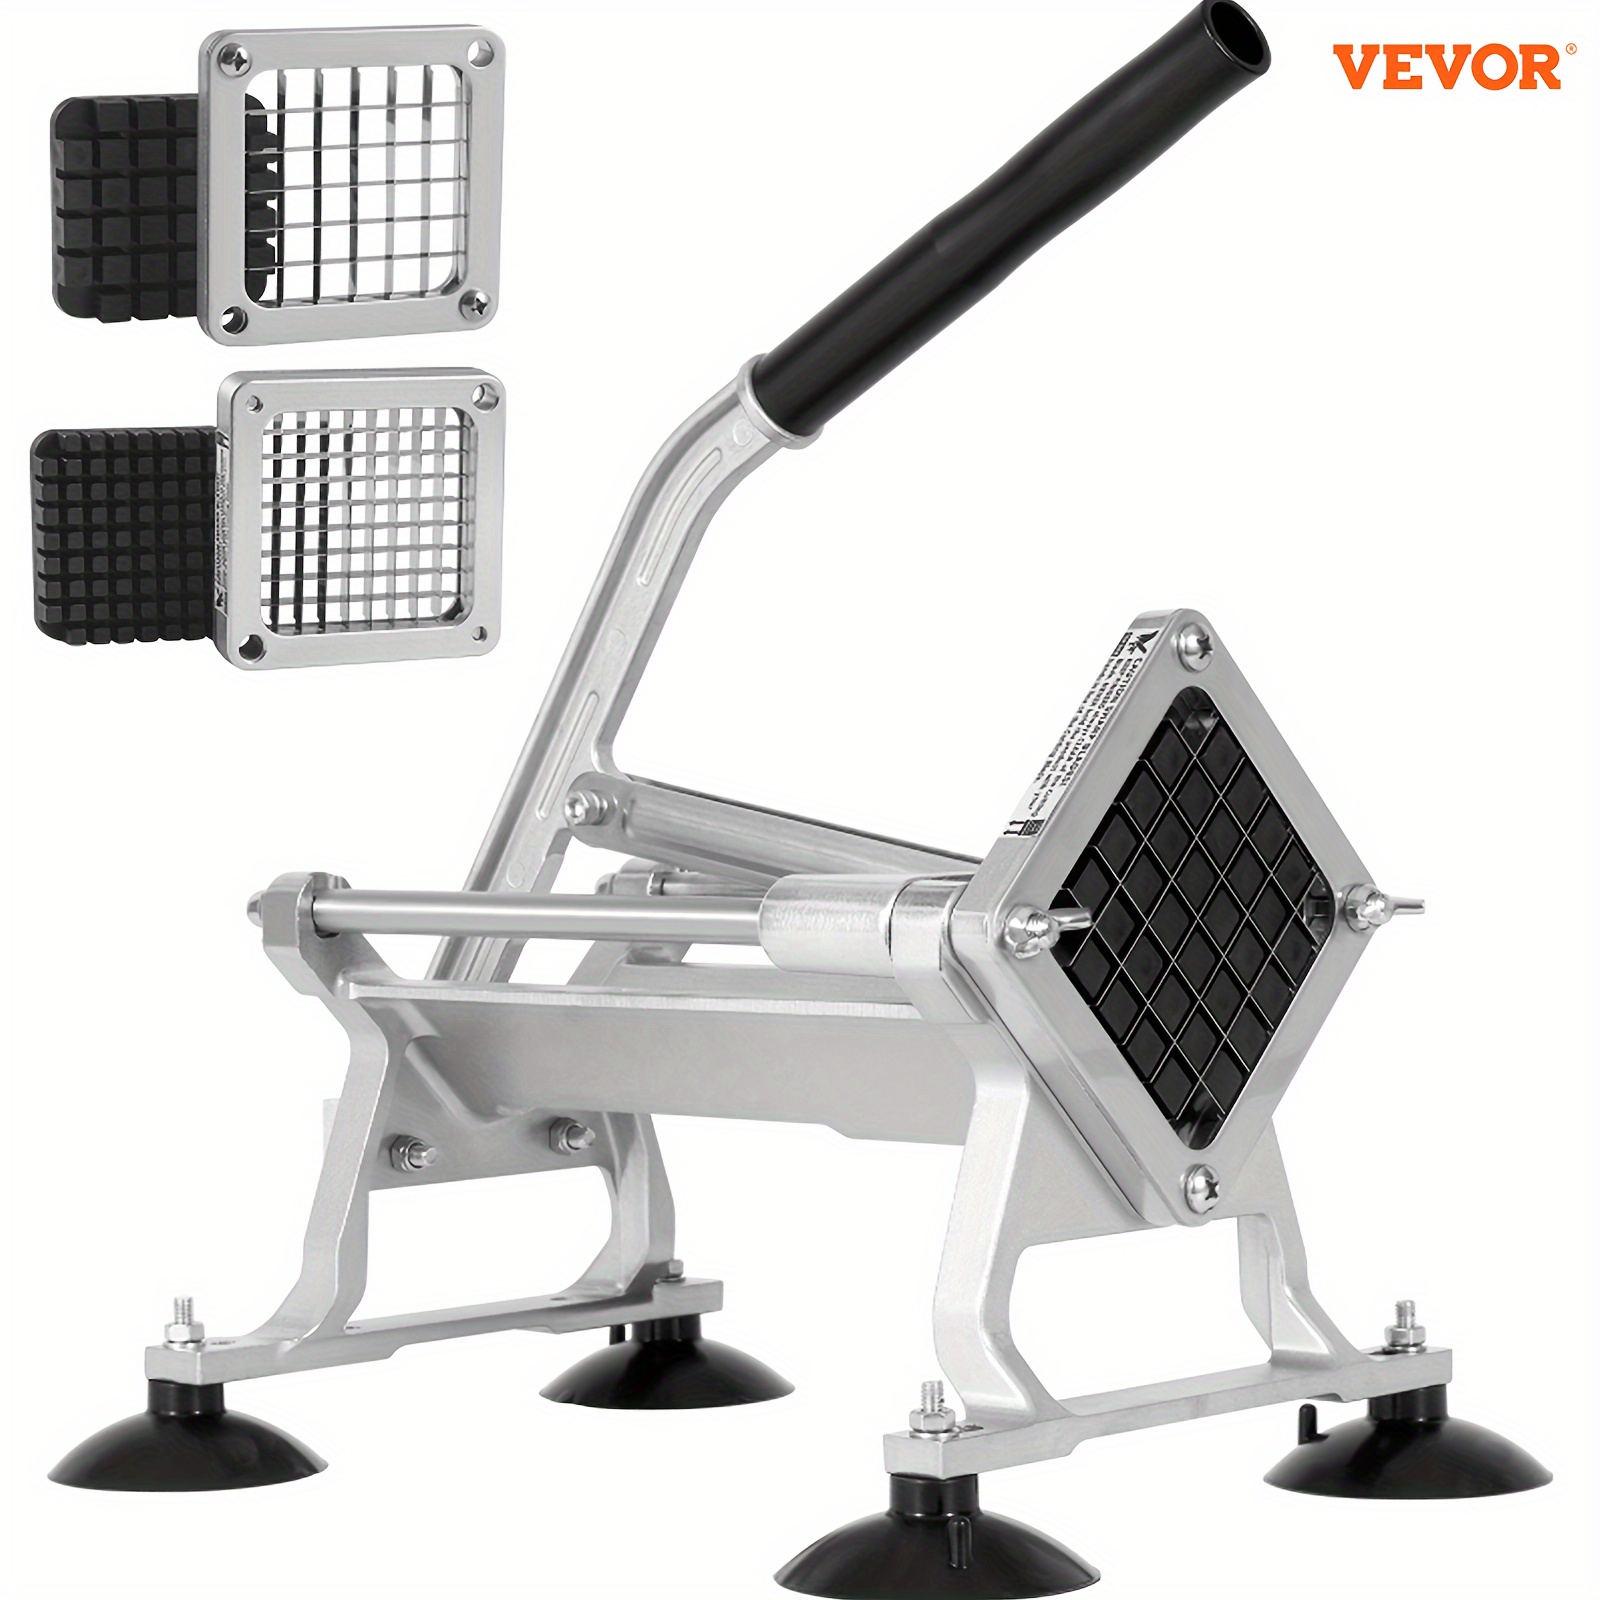 

Vevor French Fry Cutter, 1/2" And 3/8" Stainless Steel Blades Potato Slicer, Manual Potato Cutter Chopper With Suction Cups, Great For Potato, French Fries, Cucumber, Vegetables, Carrot